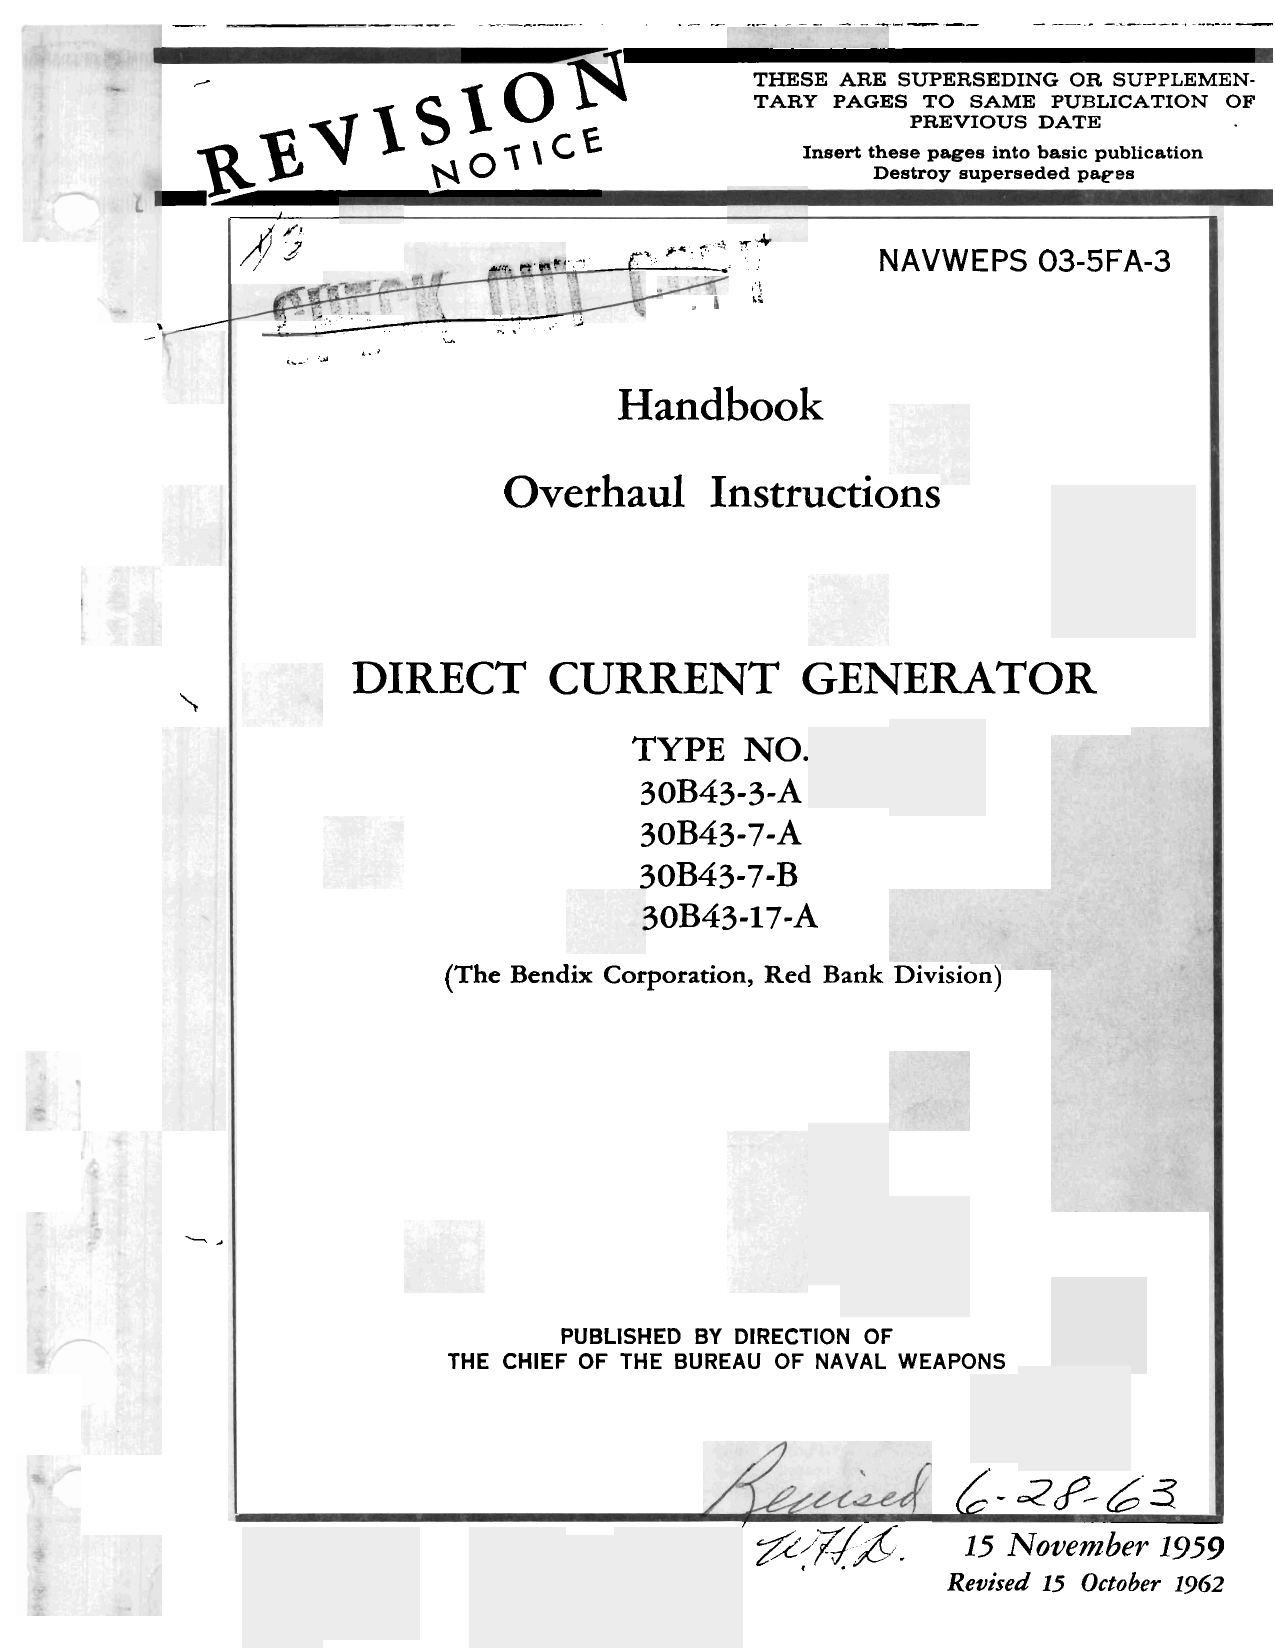 Sample page 1 from AirCorps Library document: Overhaul Instructions for Direct Current Generator - Types 30B43-3-A, 30B43-7-A, 30B43-7-B, 30B43-17-A